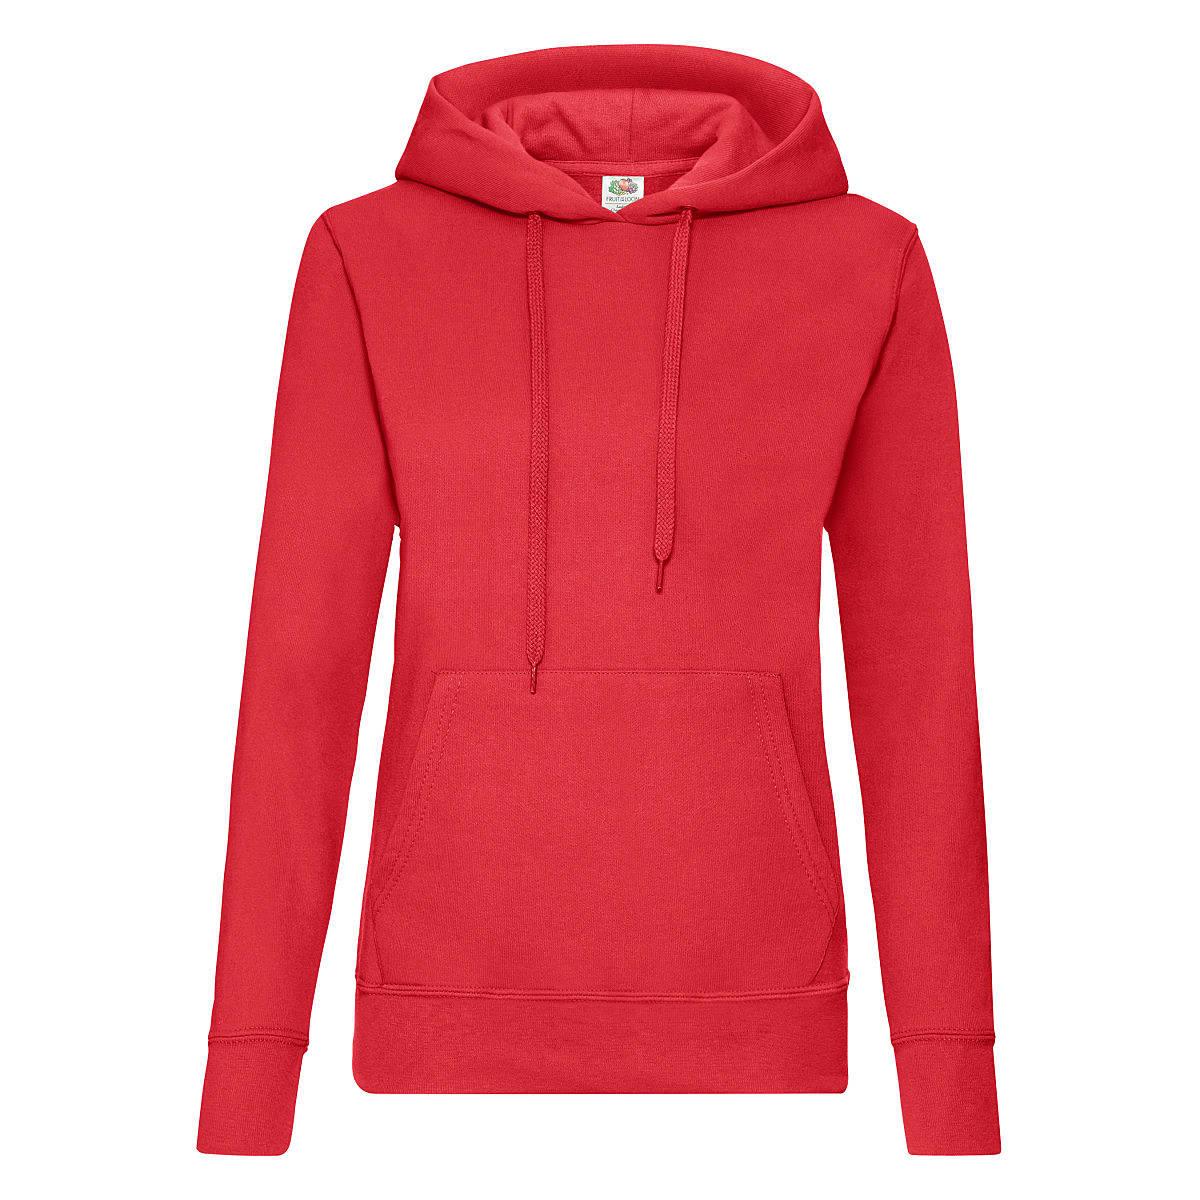 Fruit Of The Loom Lady-Fit Classic Hoodie in Red (Product Code: 62038)